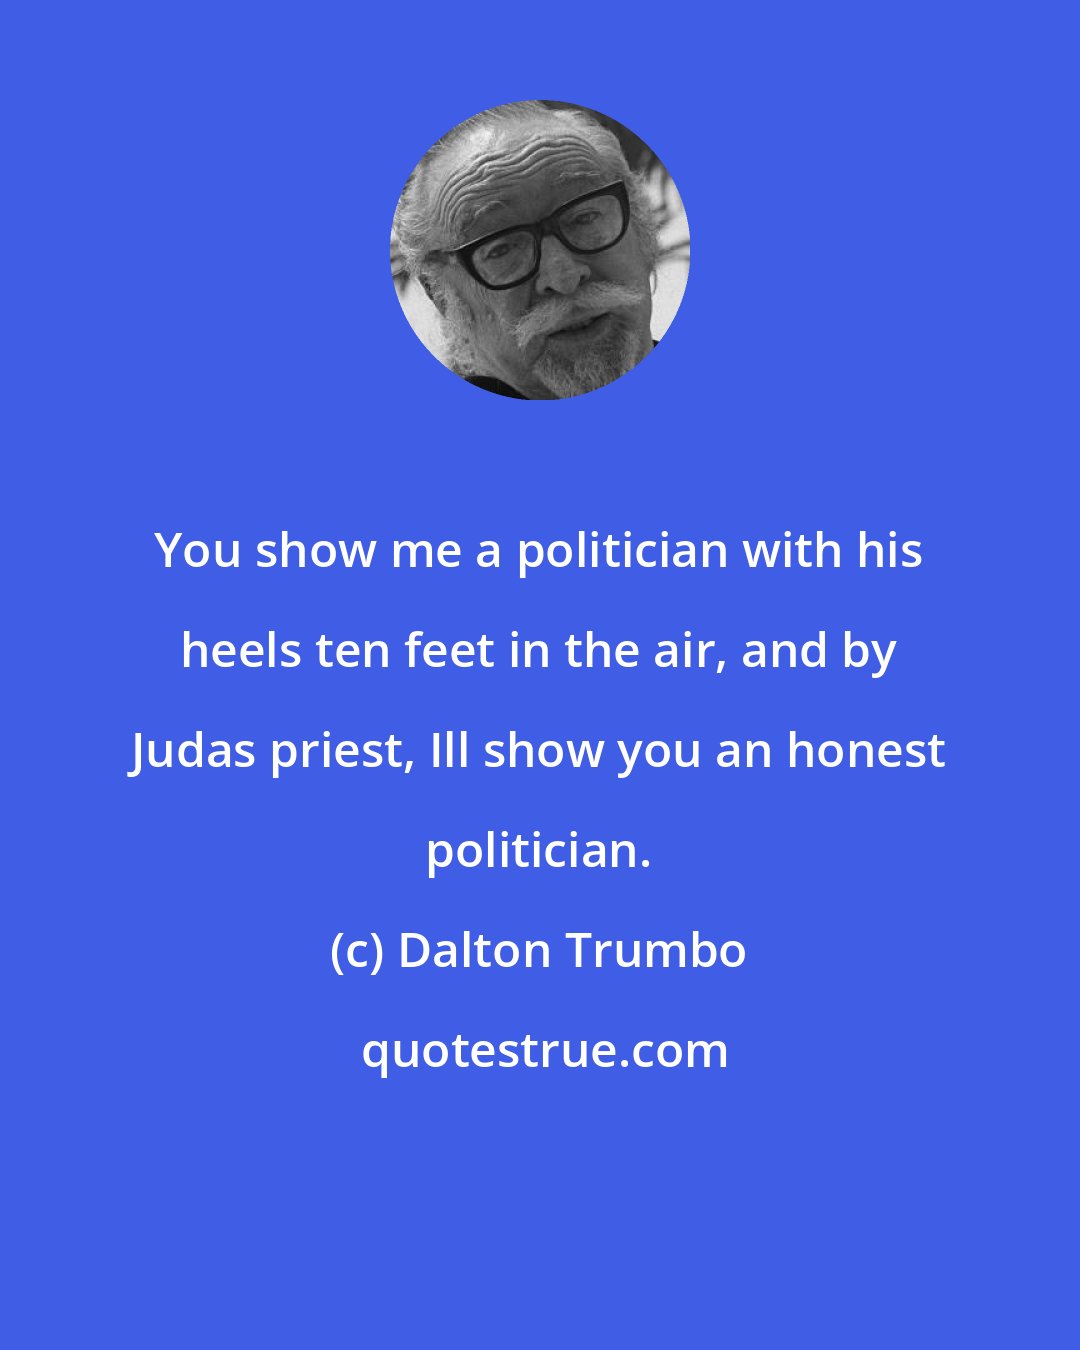 Dalton Trumbo: You show me a politician with his heels ten feet in the air, and by Judas priest, Ill show you an honest politician.